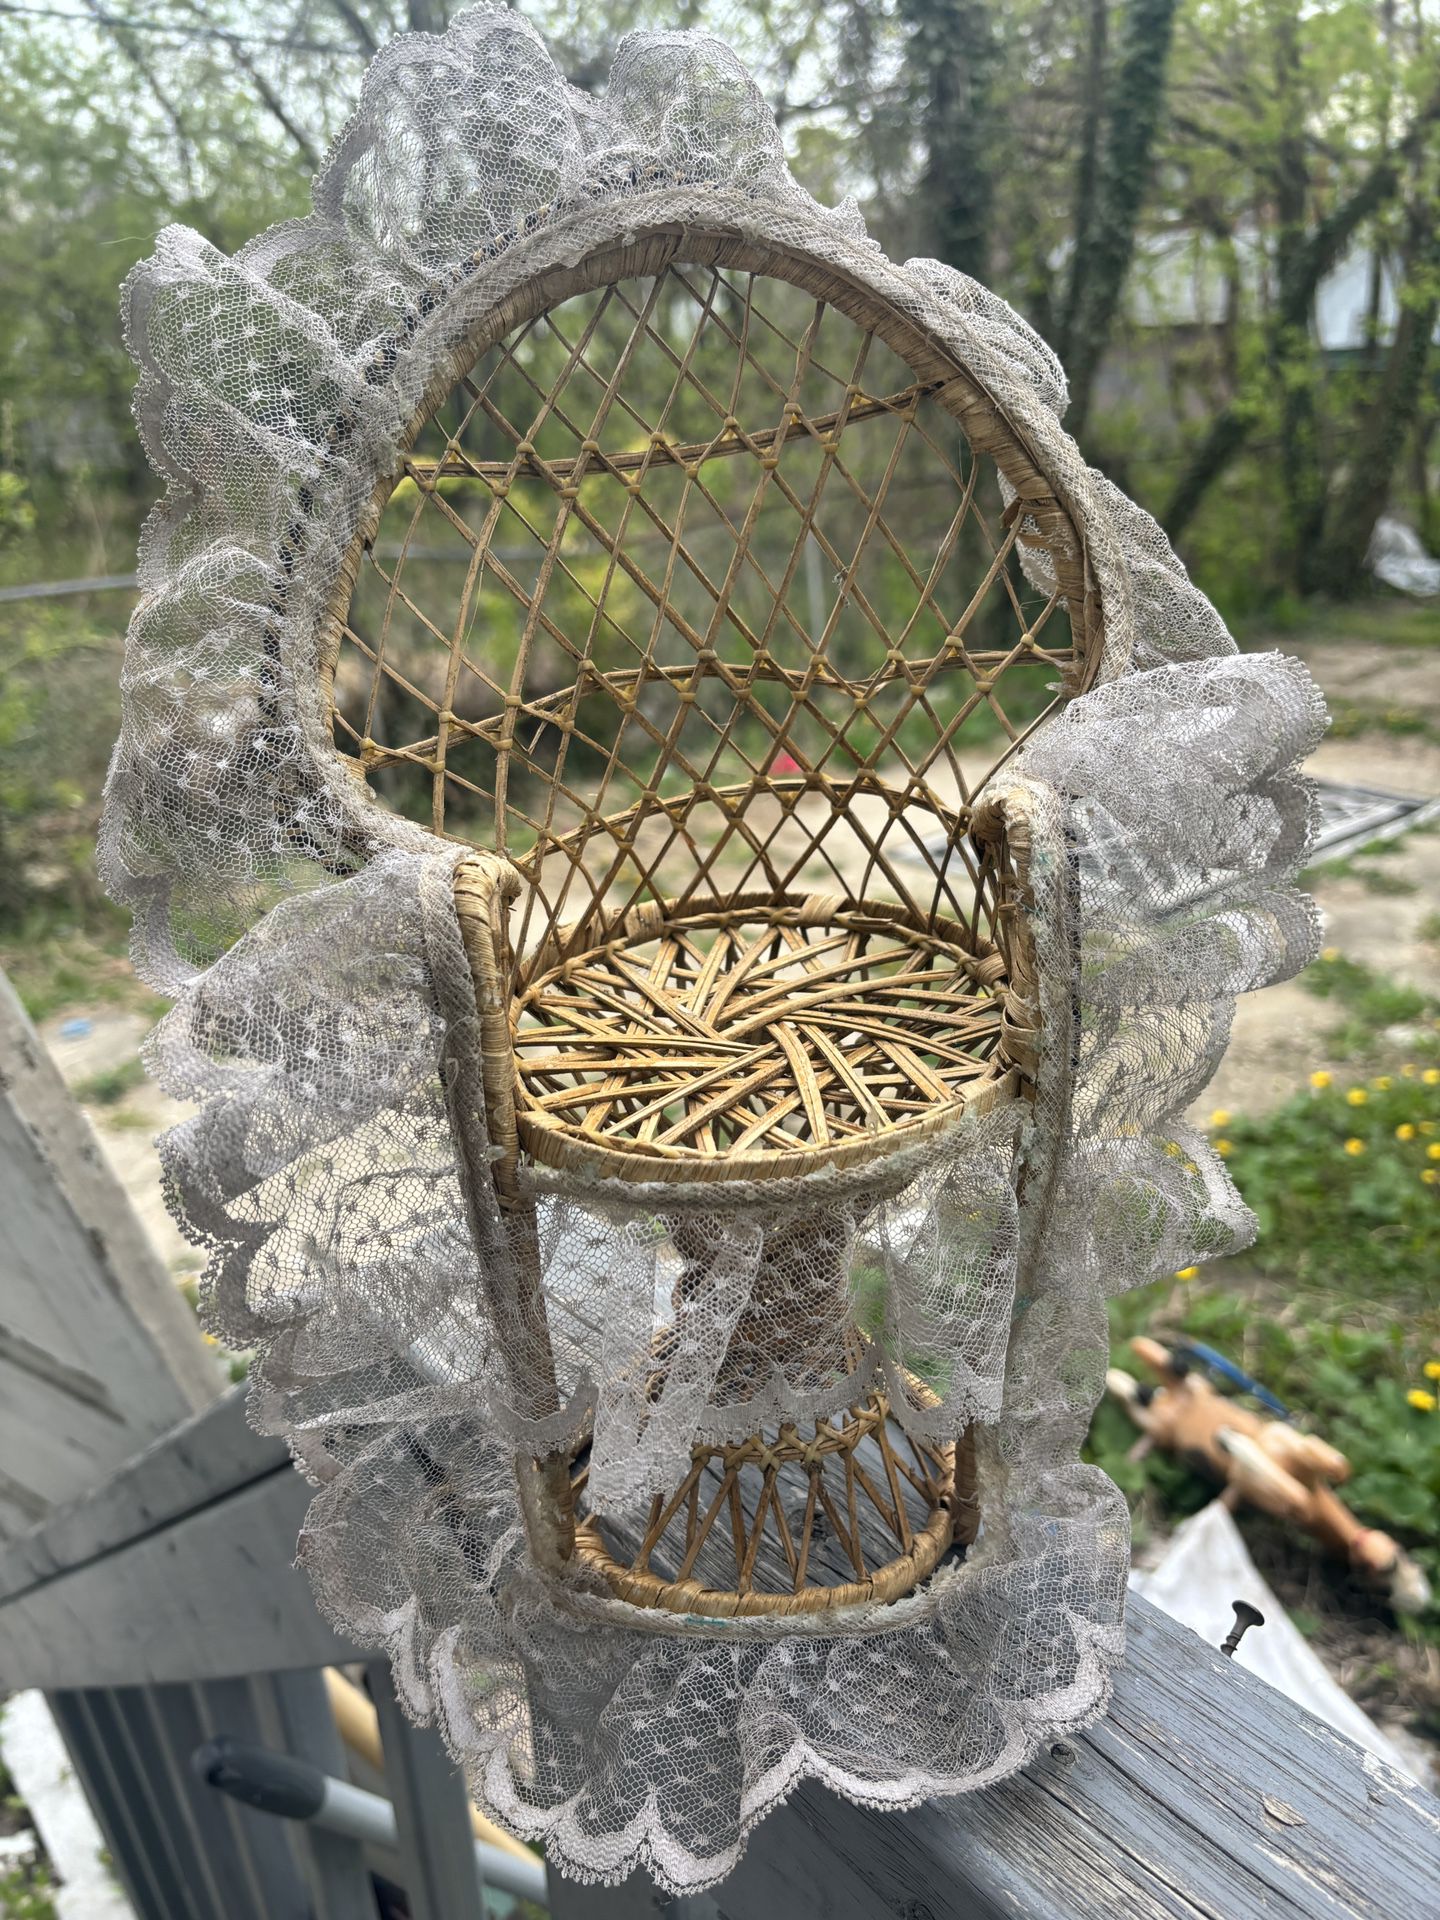 Vintage Wicker Mini Peacock Chair With Ruffles 